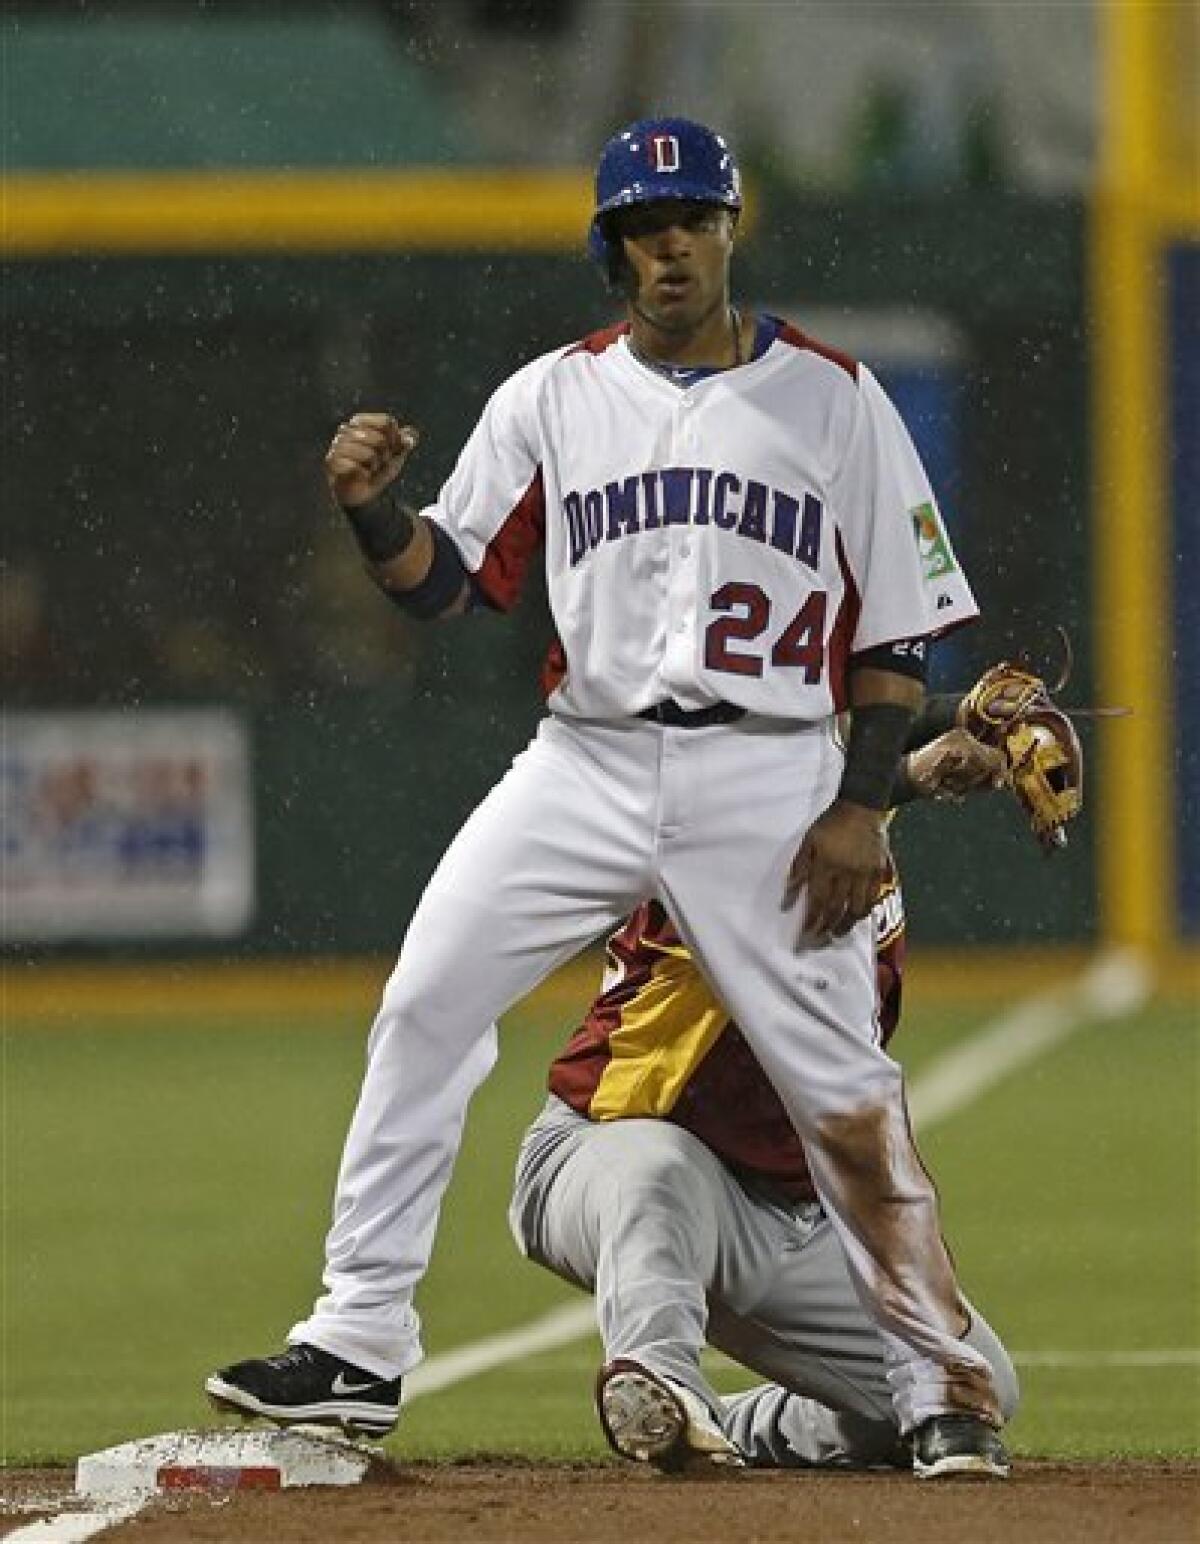 Dominican Republic taking a different approach at WBC